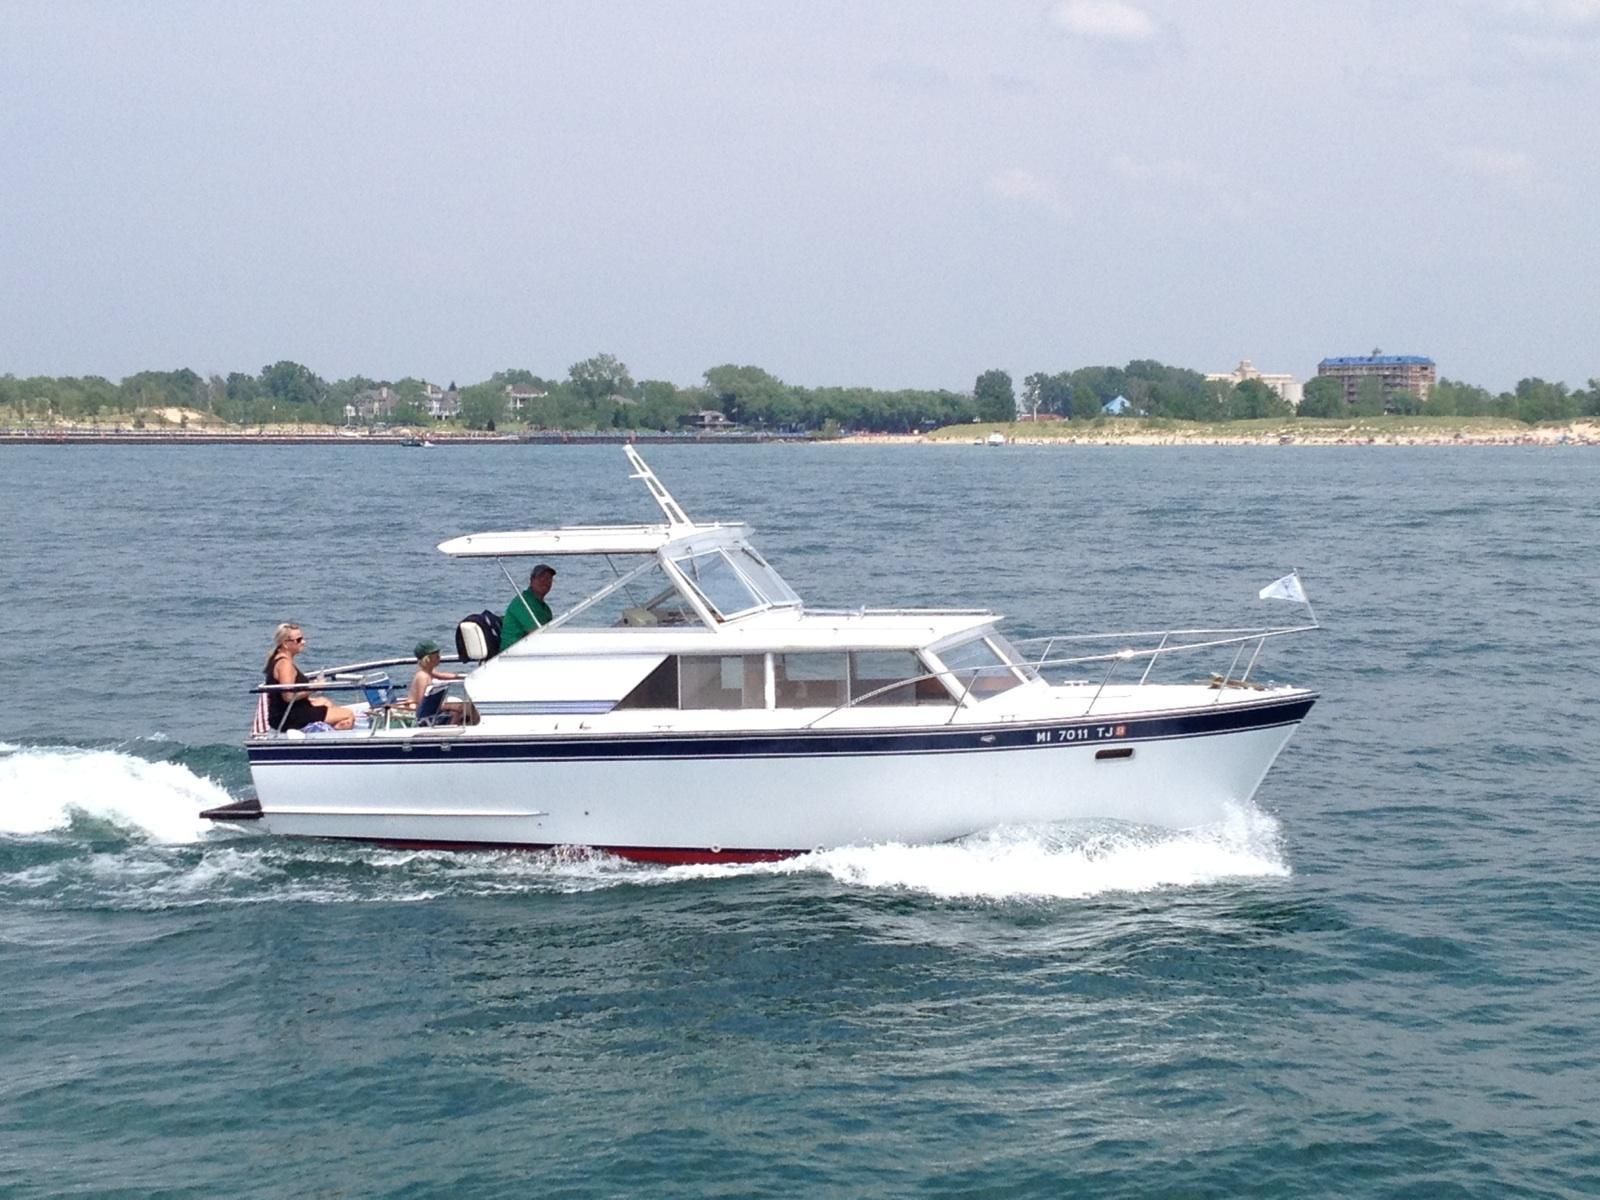 Marinette 1968 for sale for $10,000 - Boats-from-USA.com